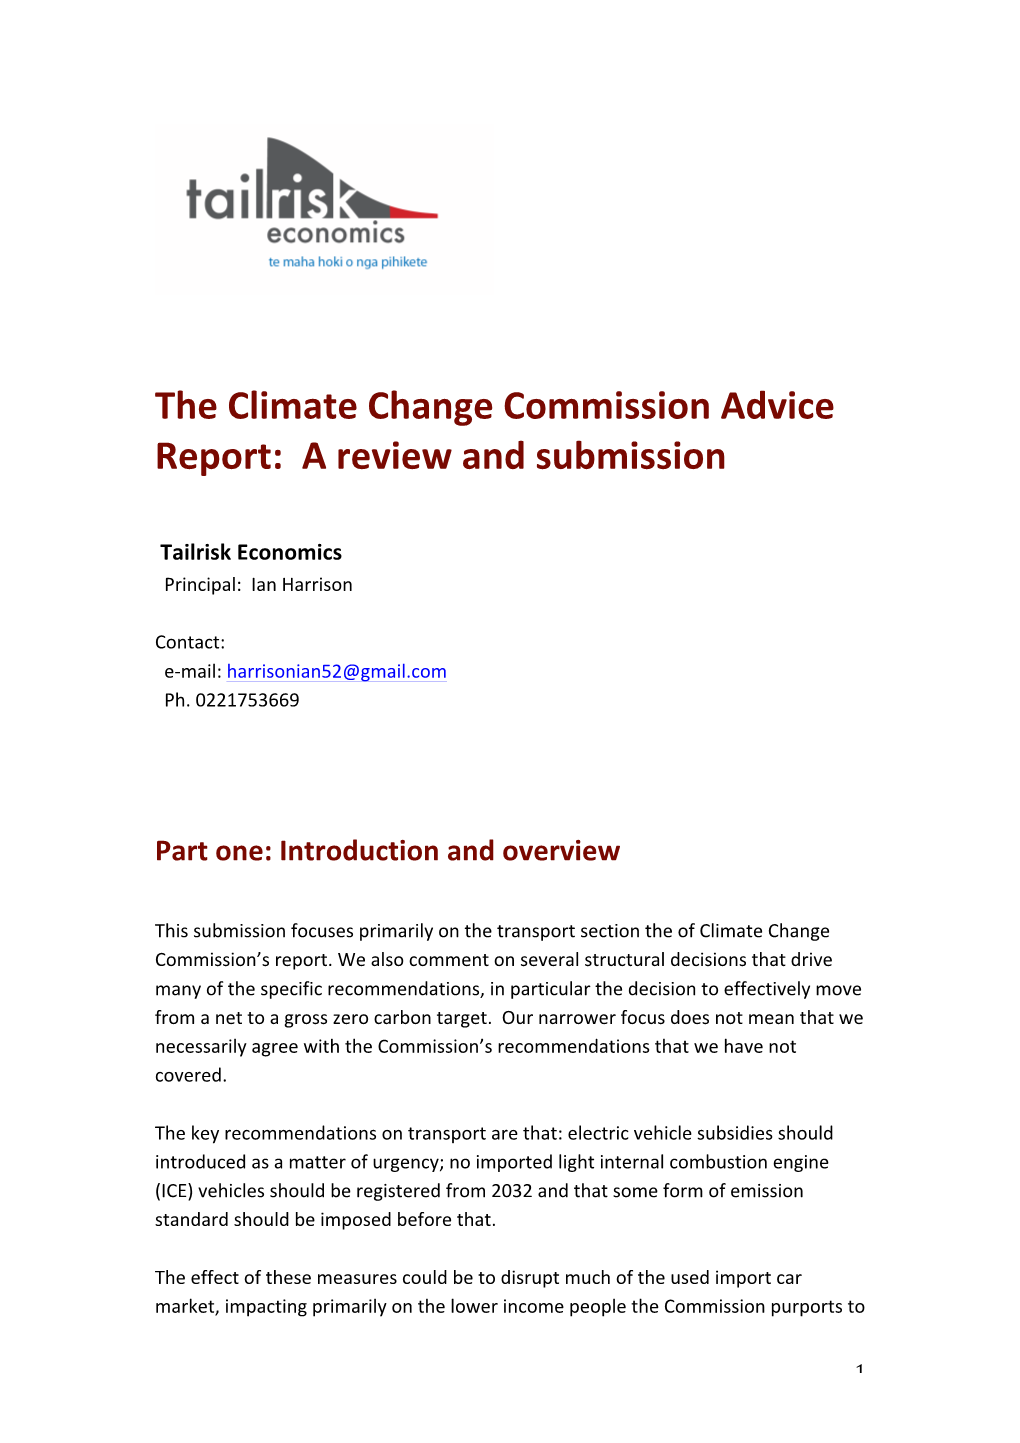 The Climate Change Commission Advice Report: a Review and Submission